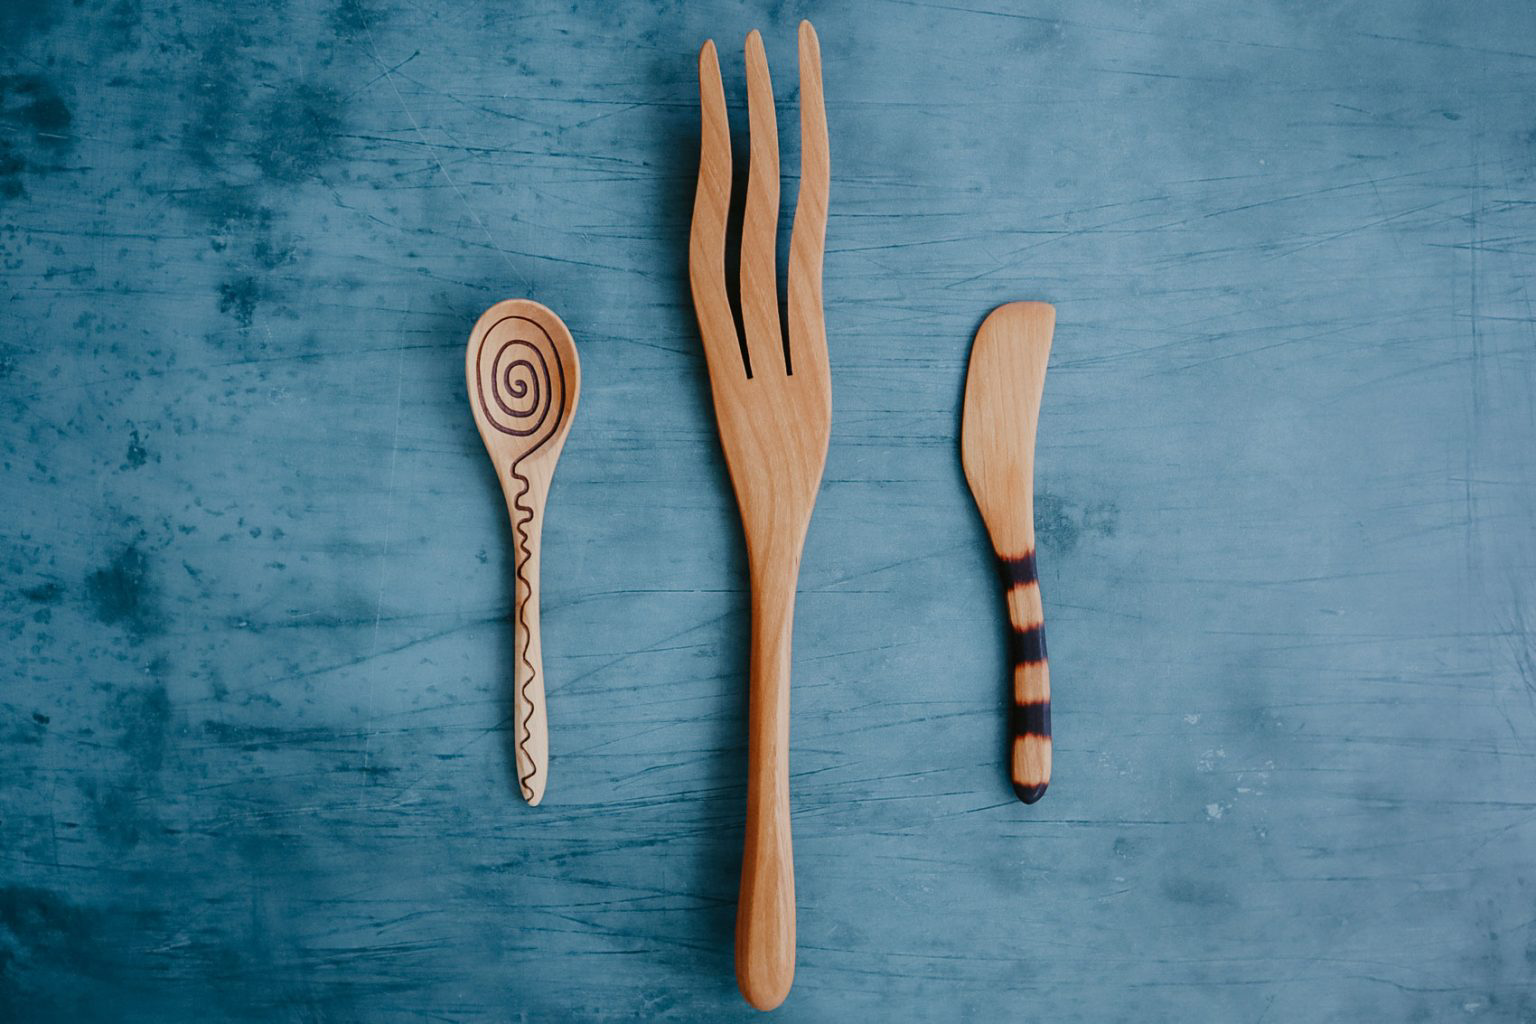 A uniquely designed wooden spoon, fork and knife.